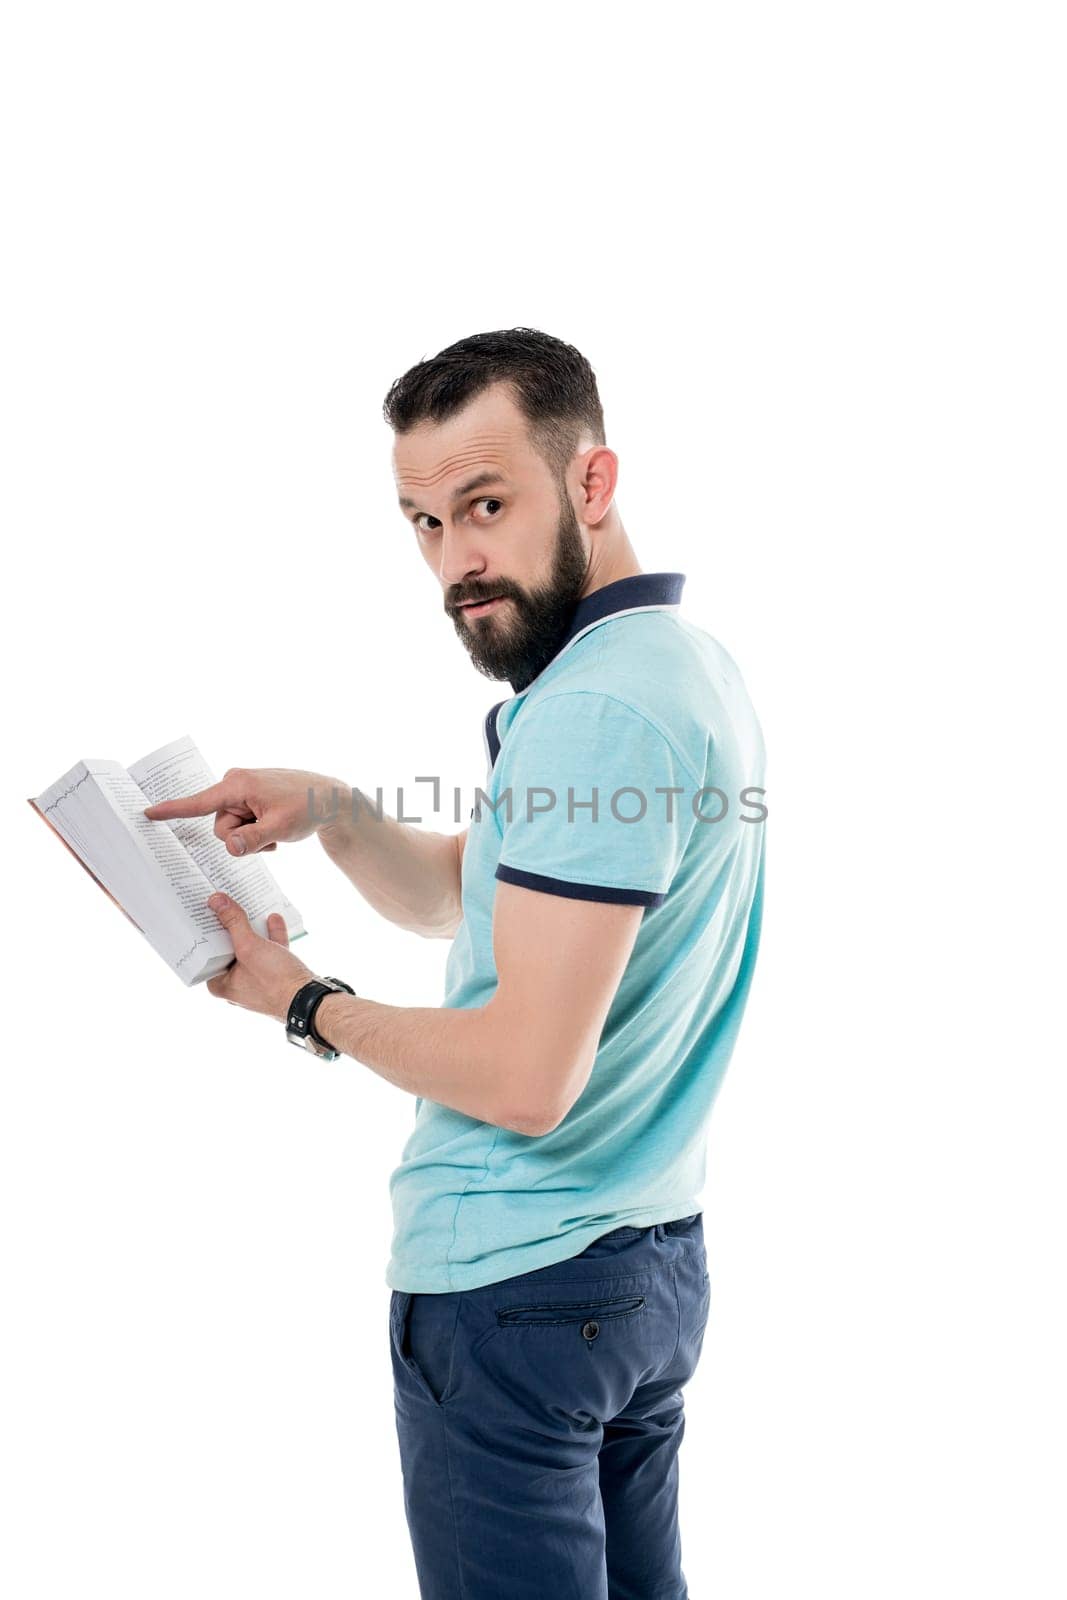 Studio photo of handsome bearded man posing with book